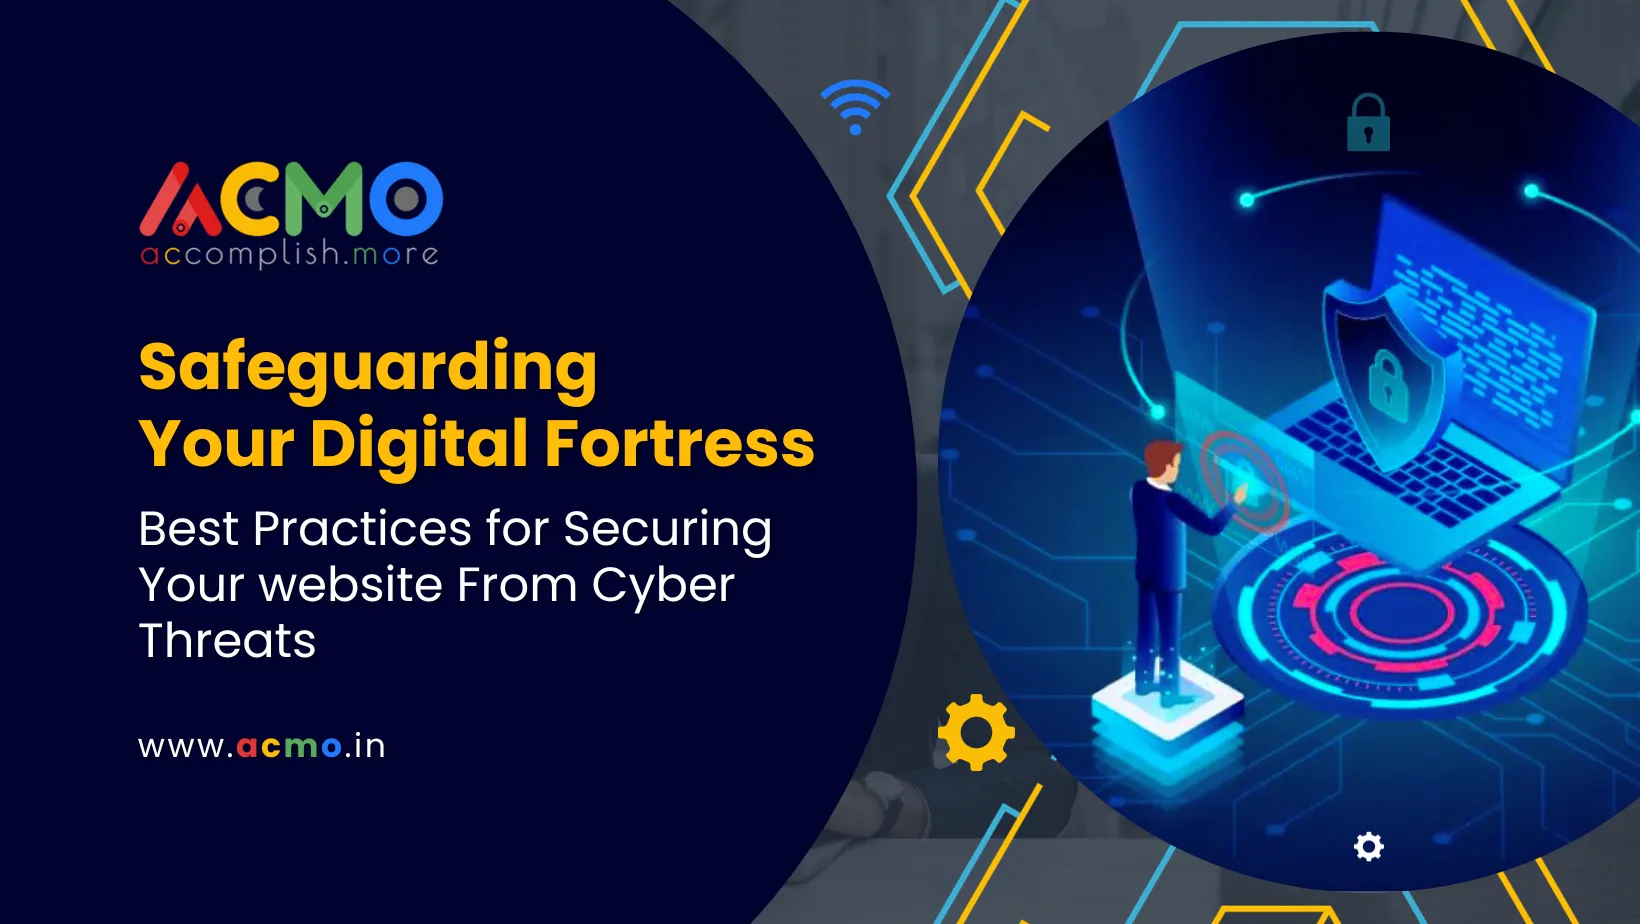 Safeguarding Your Digital Fortress: Best Practices for Securing Your Website From Cyber Threats